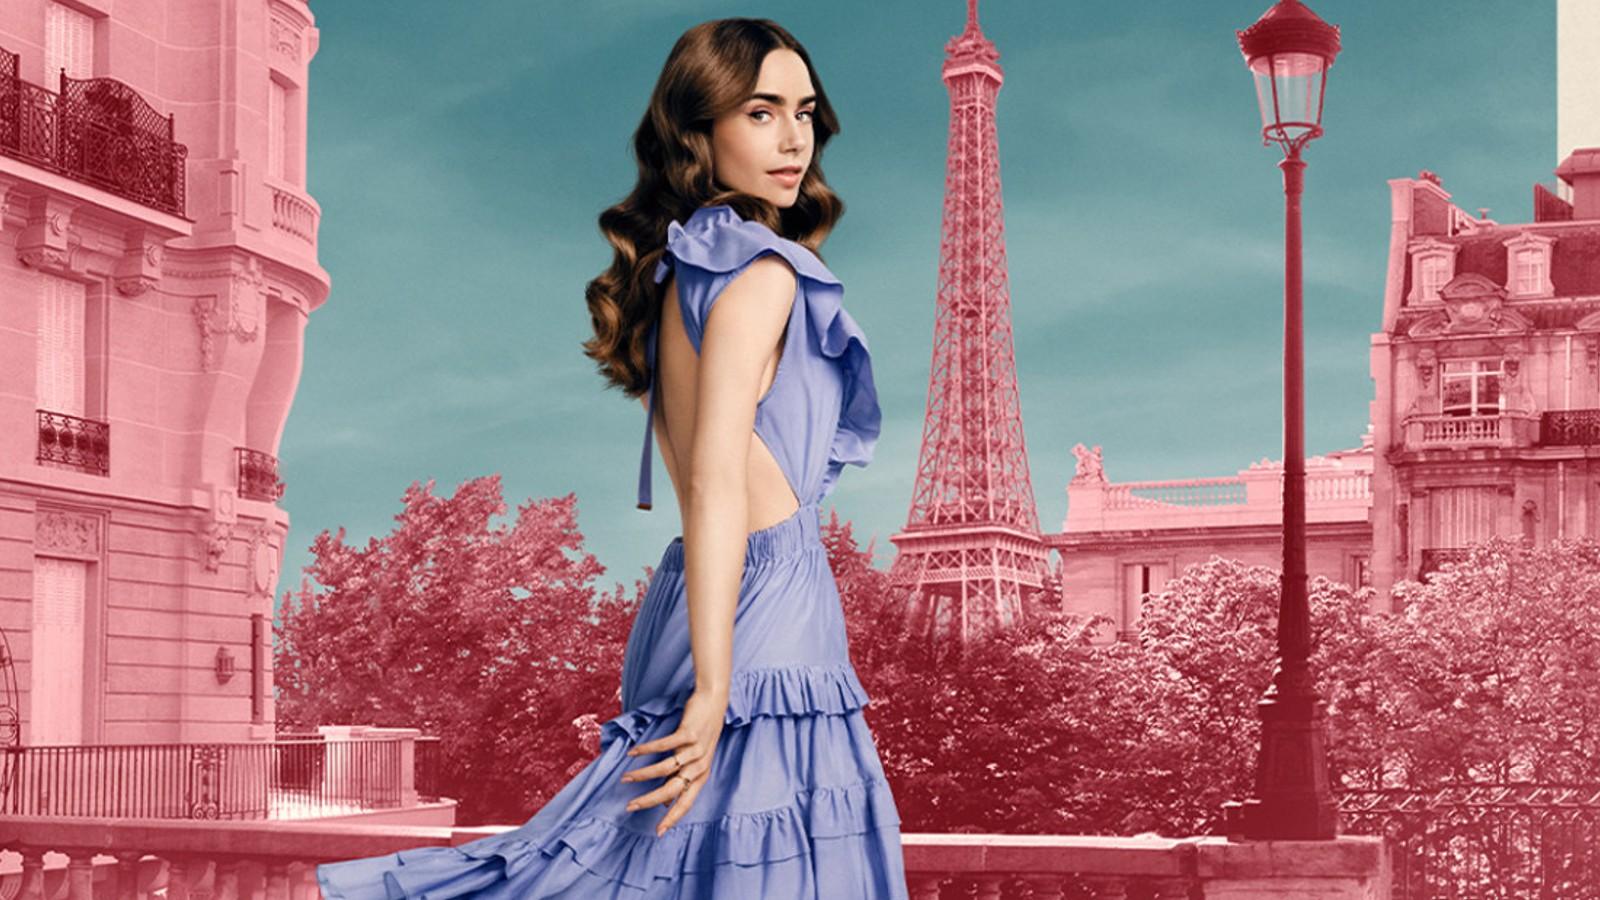 Lily Collins as Emily, in Paris.